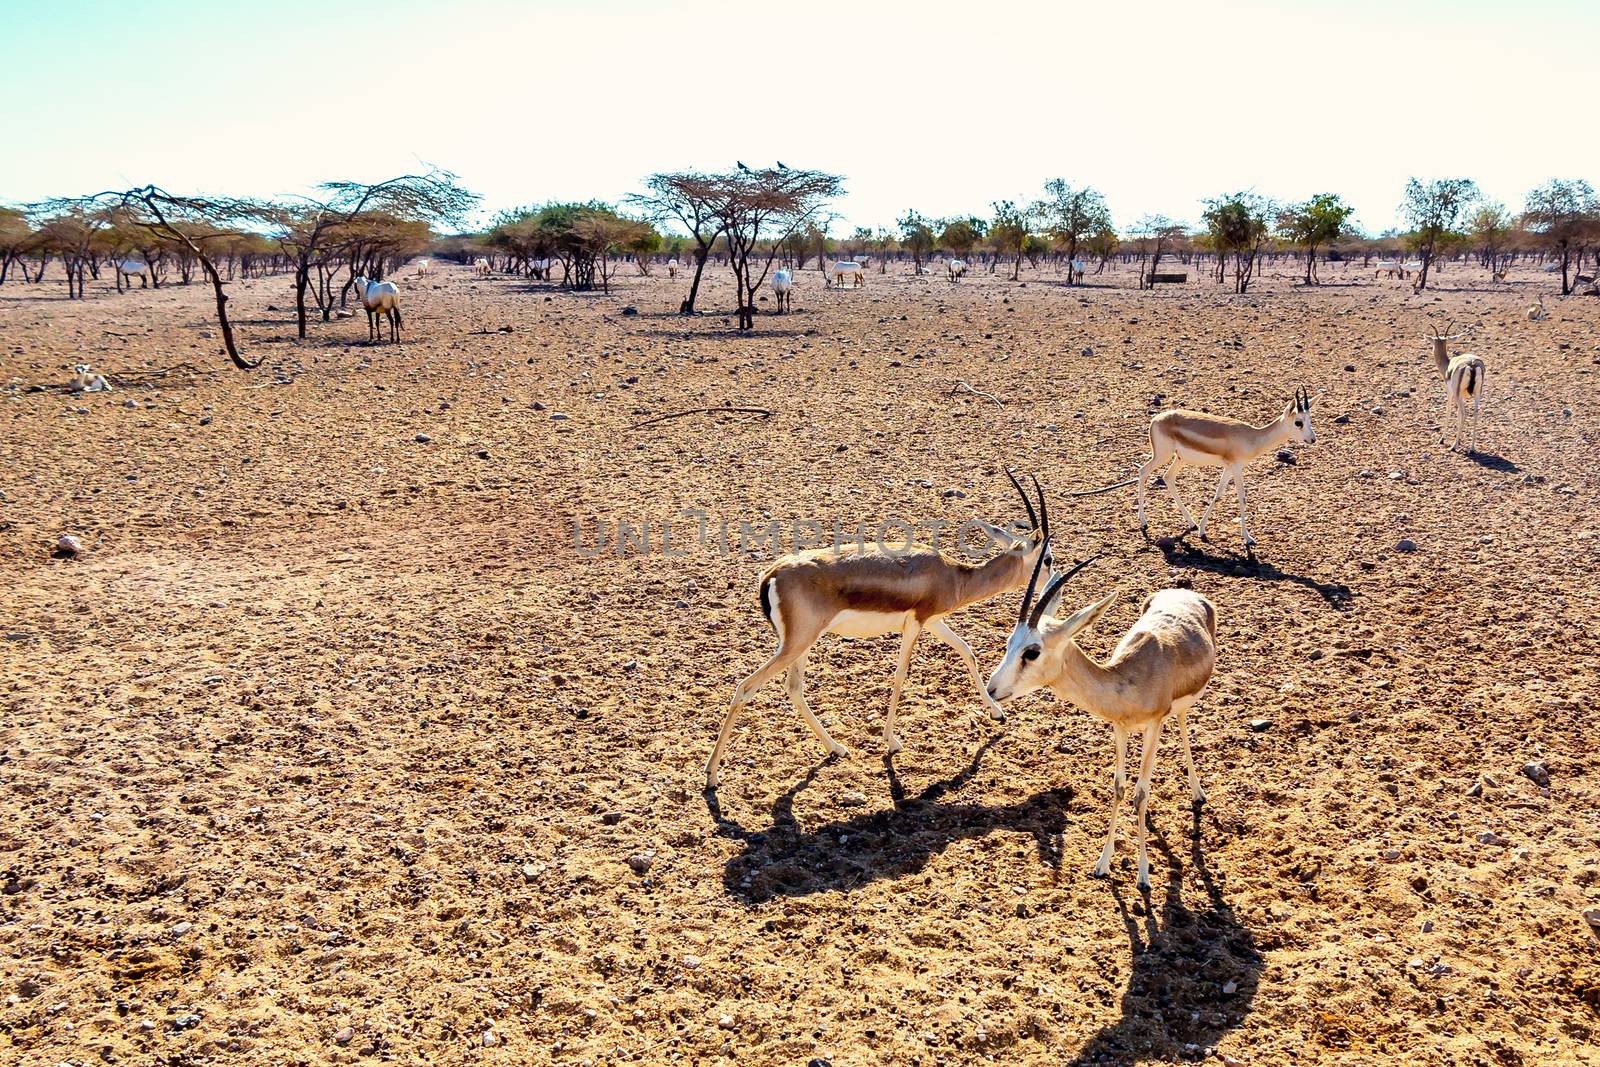 Antelope group in a safari park on the island of Sir Bani Yas, United Arab Emirates by galsand